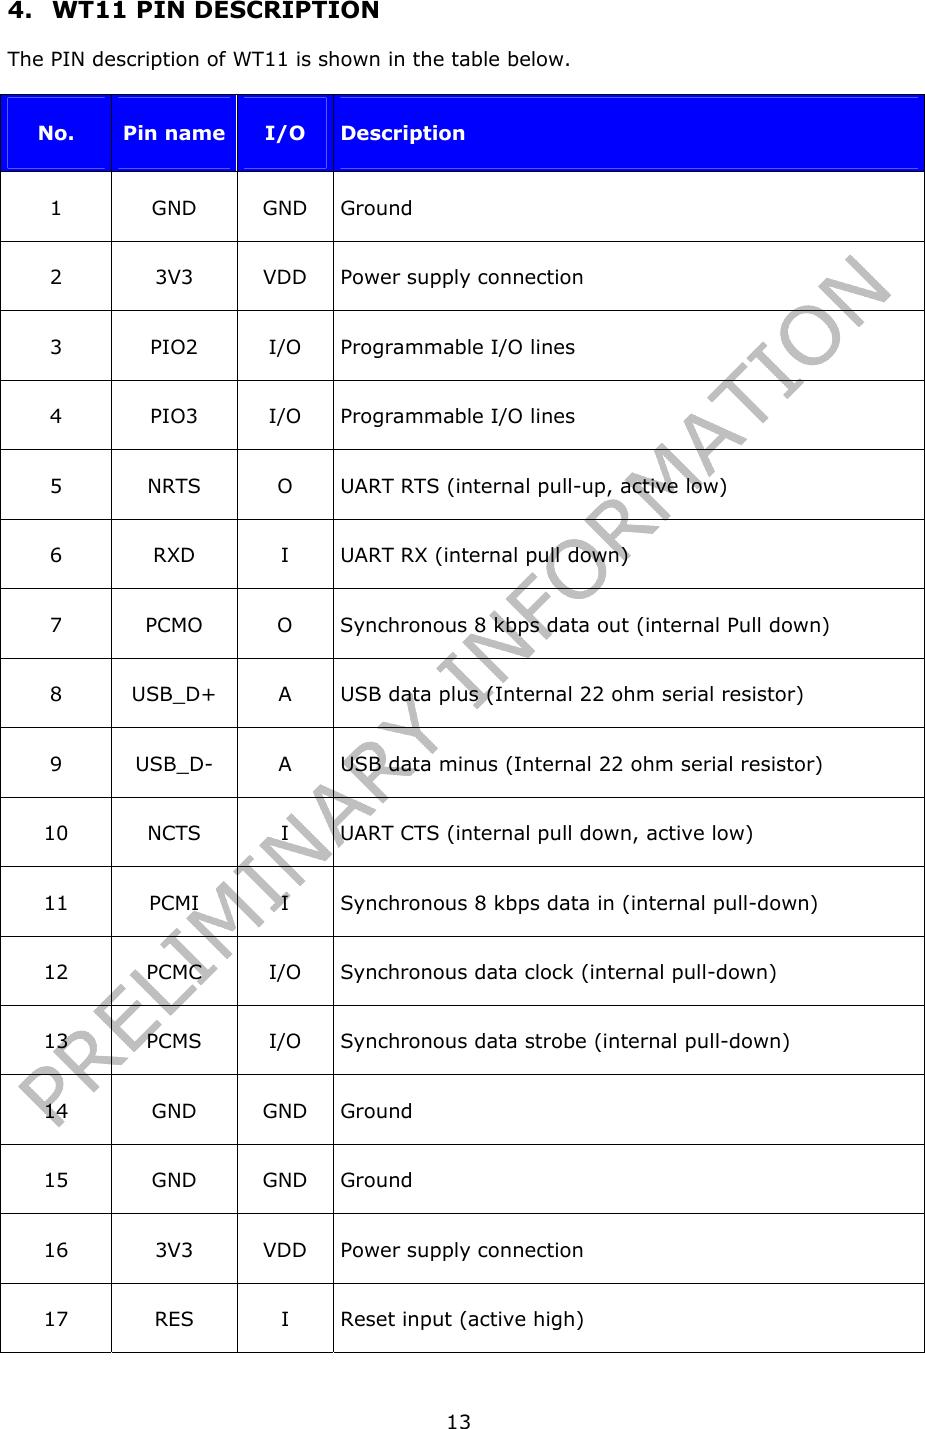   134.  WT11 PIN DESCRIPTION The PIN description of WT11 is shown in the table below.  No.  Pin name  I/O  Description 1 GND GND Ground 2 3V3 VDD Power supply connection 3  PIO2  I/O  Programmable I/O lines 4  PIO3  I/O  Programmable I/O lines 5  NRTS  O  UART RTS (internal pull-up, active low) 6  RXD  I  UART RX (internal pull down) 7  PCMO  O  Synchronous 8 kbps data out (internal Pull down) 8  USB_D+  A  USB data plus (Internal 22 ohm serial resistor) 9  USB_D-  A  USB data minus (Internal 22 ohm serial resistor) 10  NCTS  I  UART CTS (internal pull down, active low) 11  PCMI  I  Synchronous 8 kbps data in (internal pull-down) 12 PCMC I/O Synchronous data clock (internal pull-down) 13  PCMS  I/O  Synchronous data strobe (internal pull-down) 14 GND GND Ground 15 GND GND Ground 16 3V3 VDD Power supply connection 17 RES I Reset input (active high) 